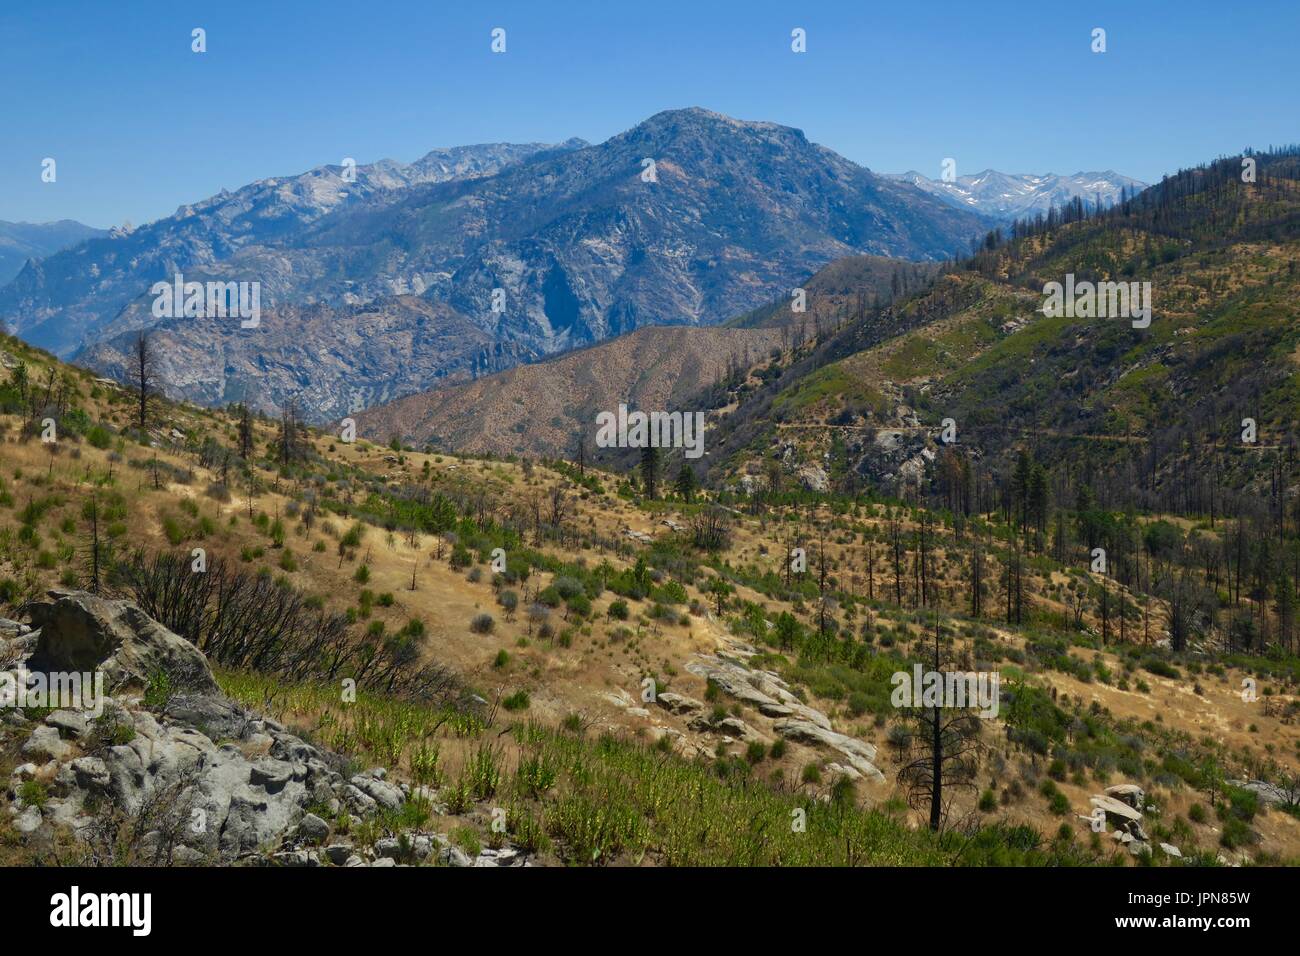 View of mountains from Hume Lake Road, California, United States Stock Photo